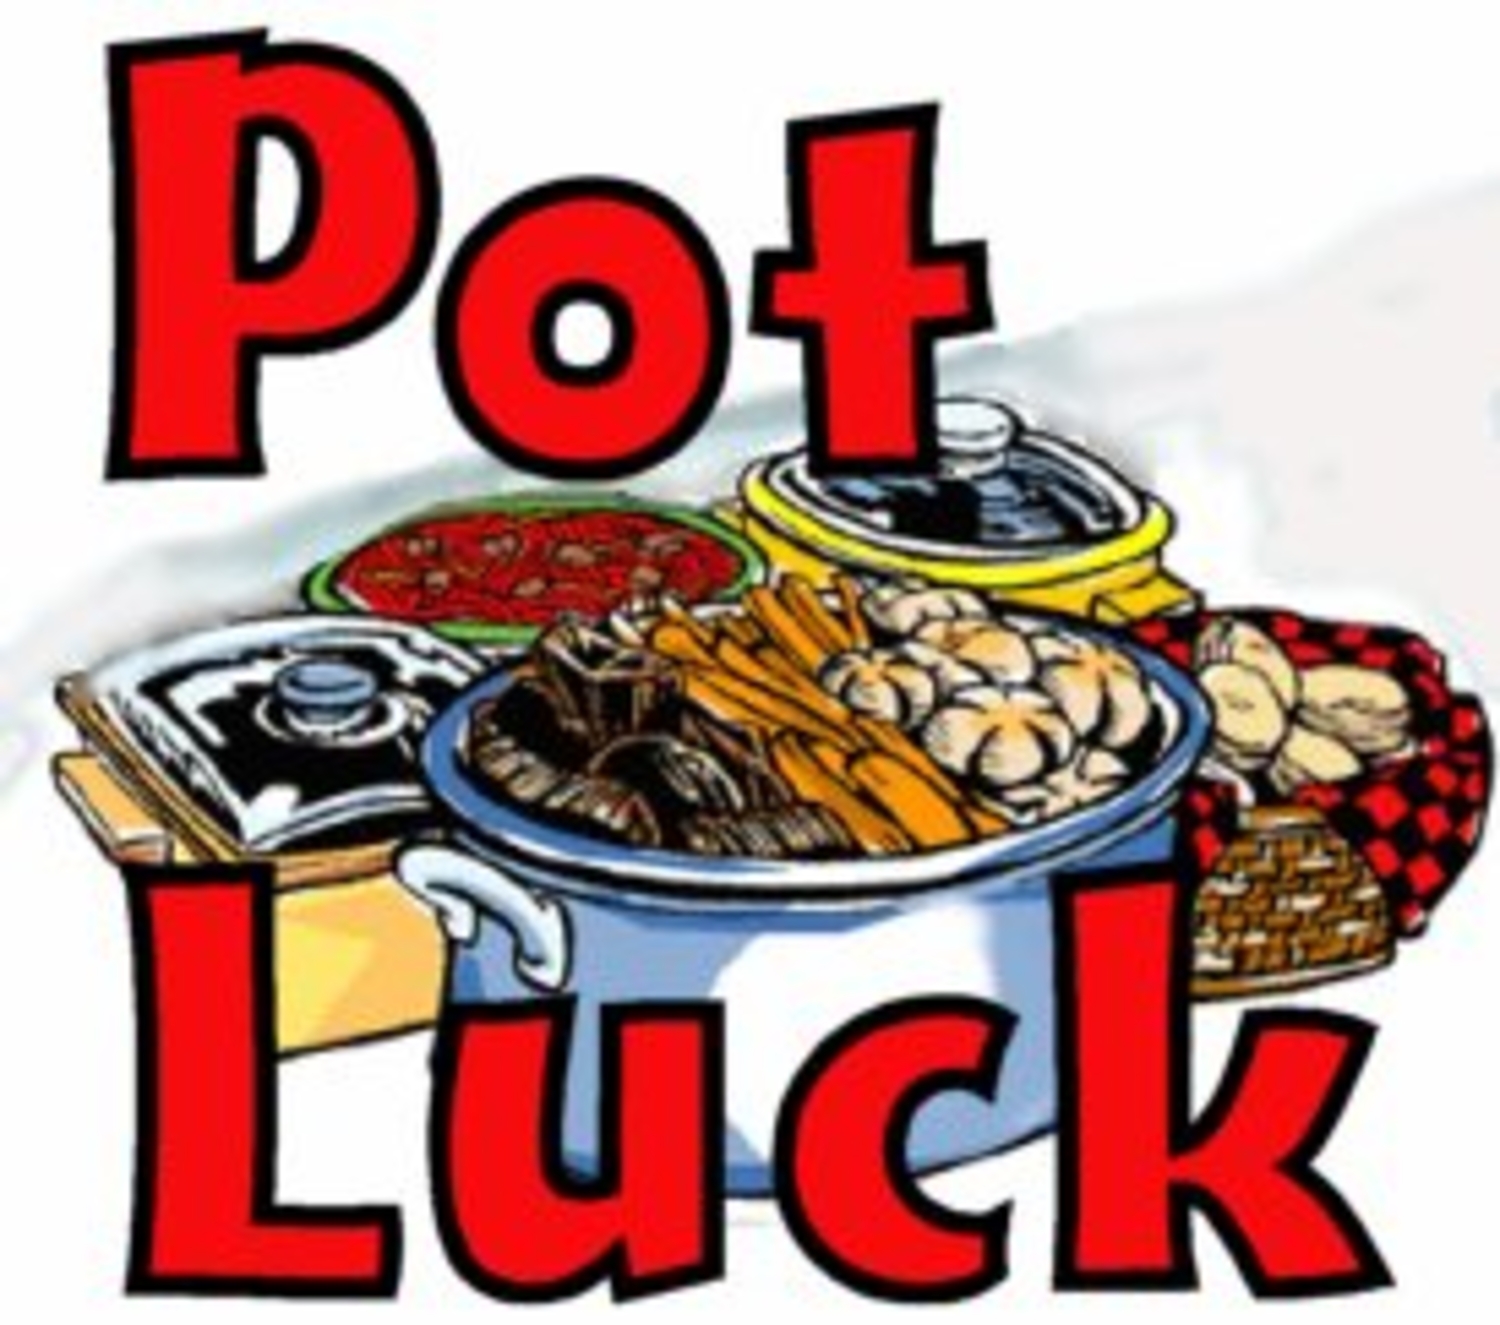 Clip Arts Related To : clipart of potluck. view all Potluck Party Cliparts)...